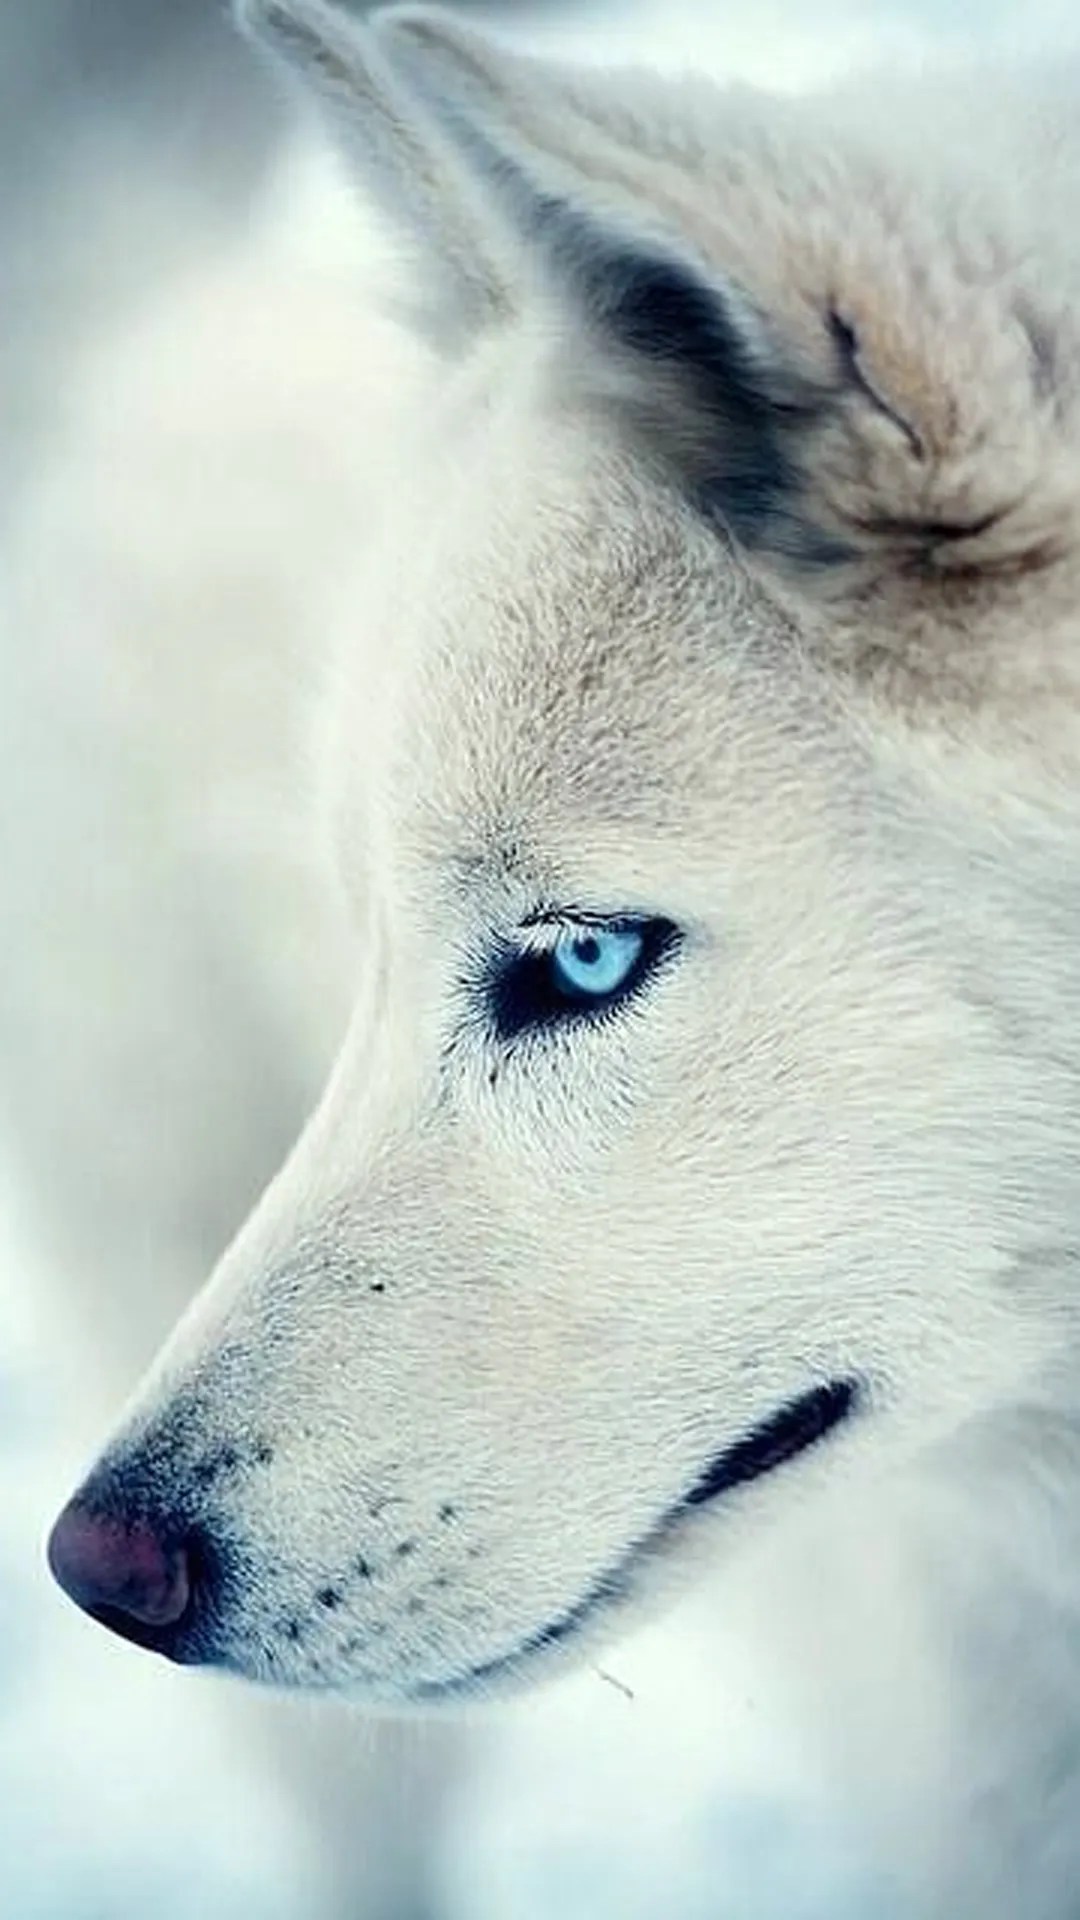 Wolf Wallpaper for iPhone Pro Max, X, 6